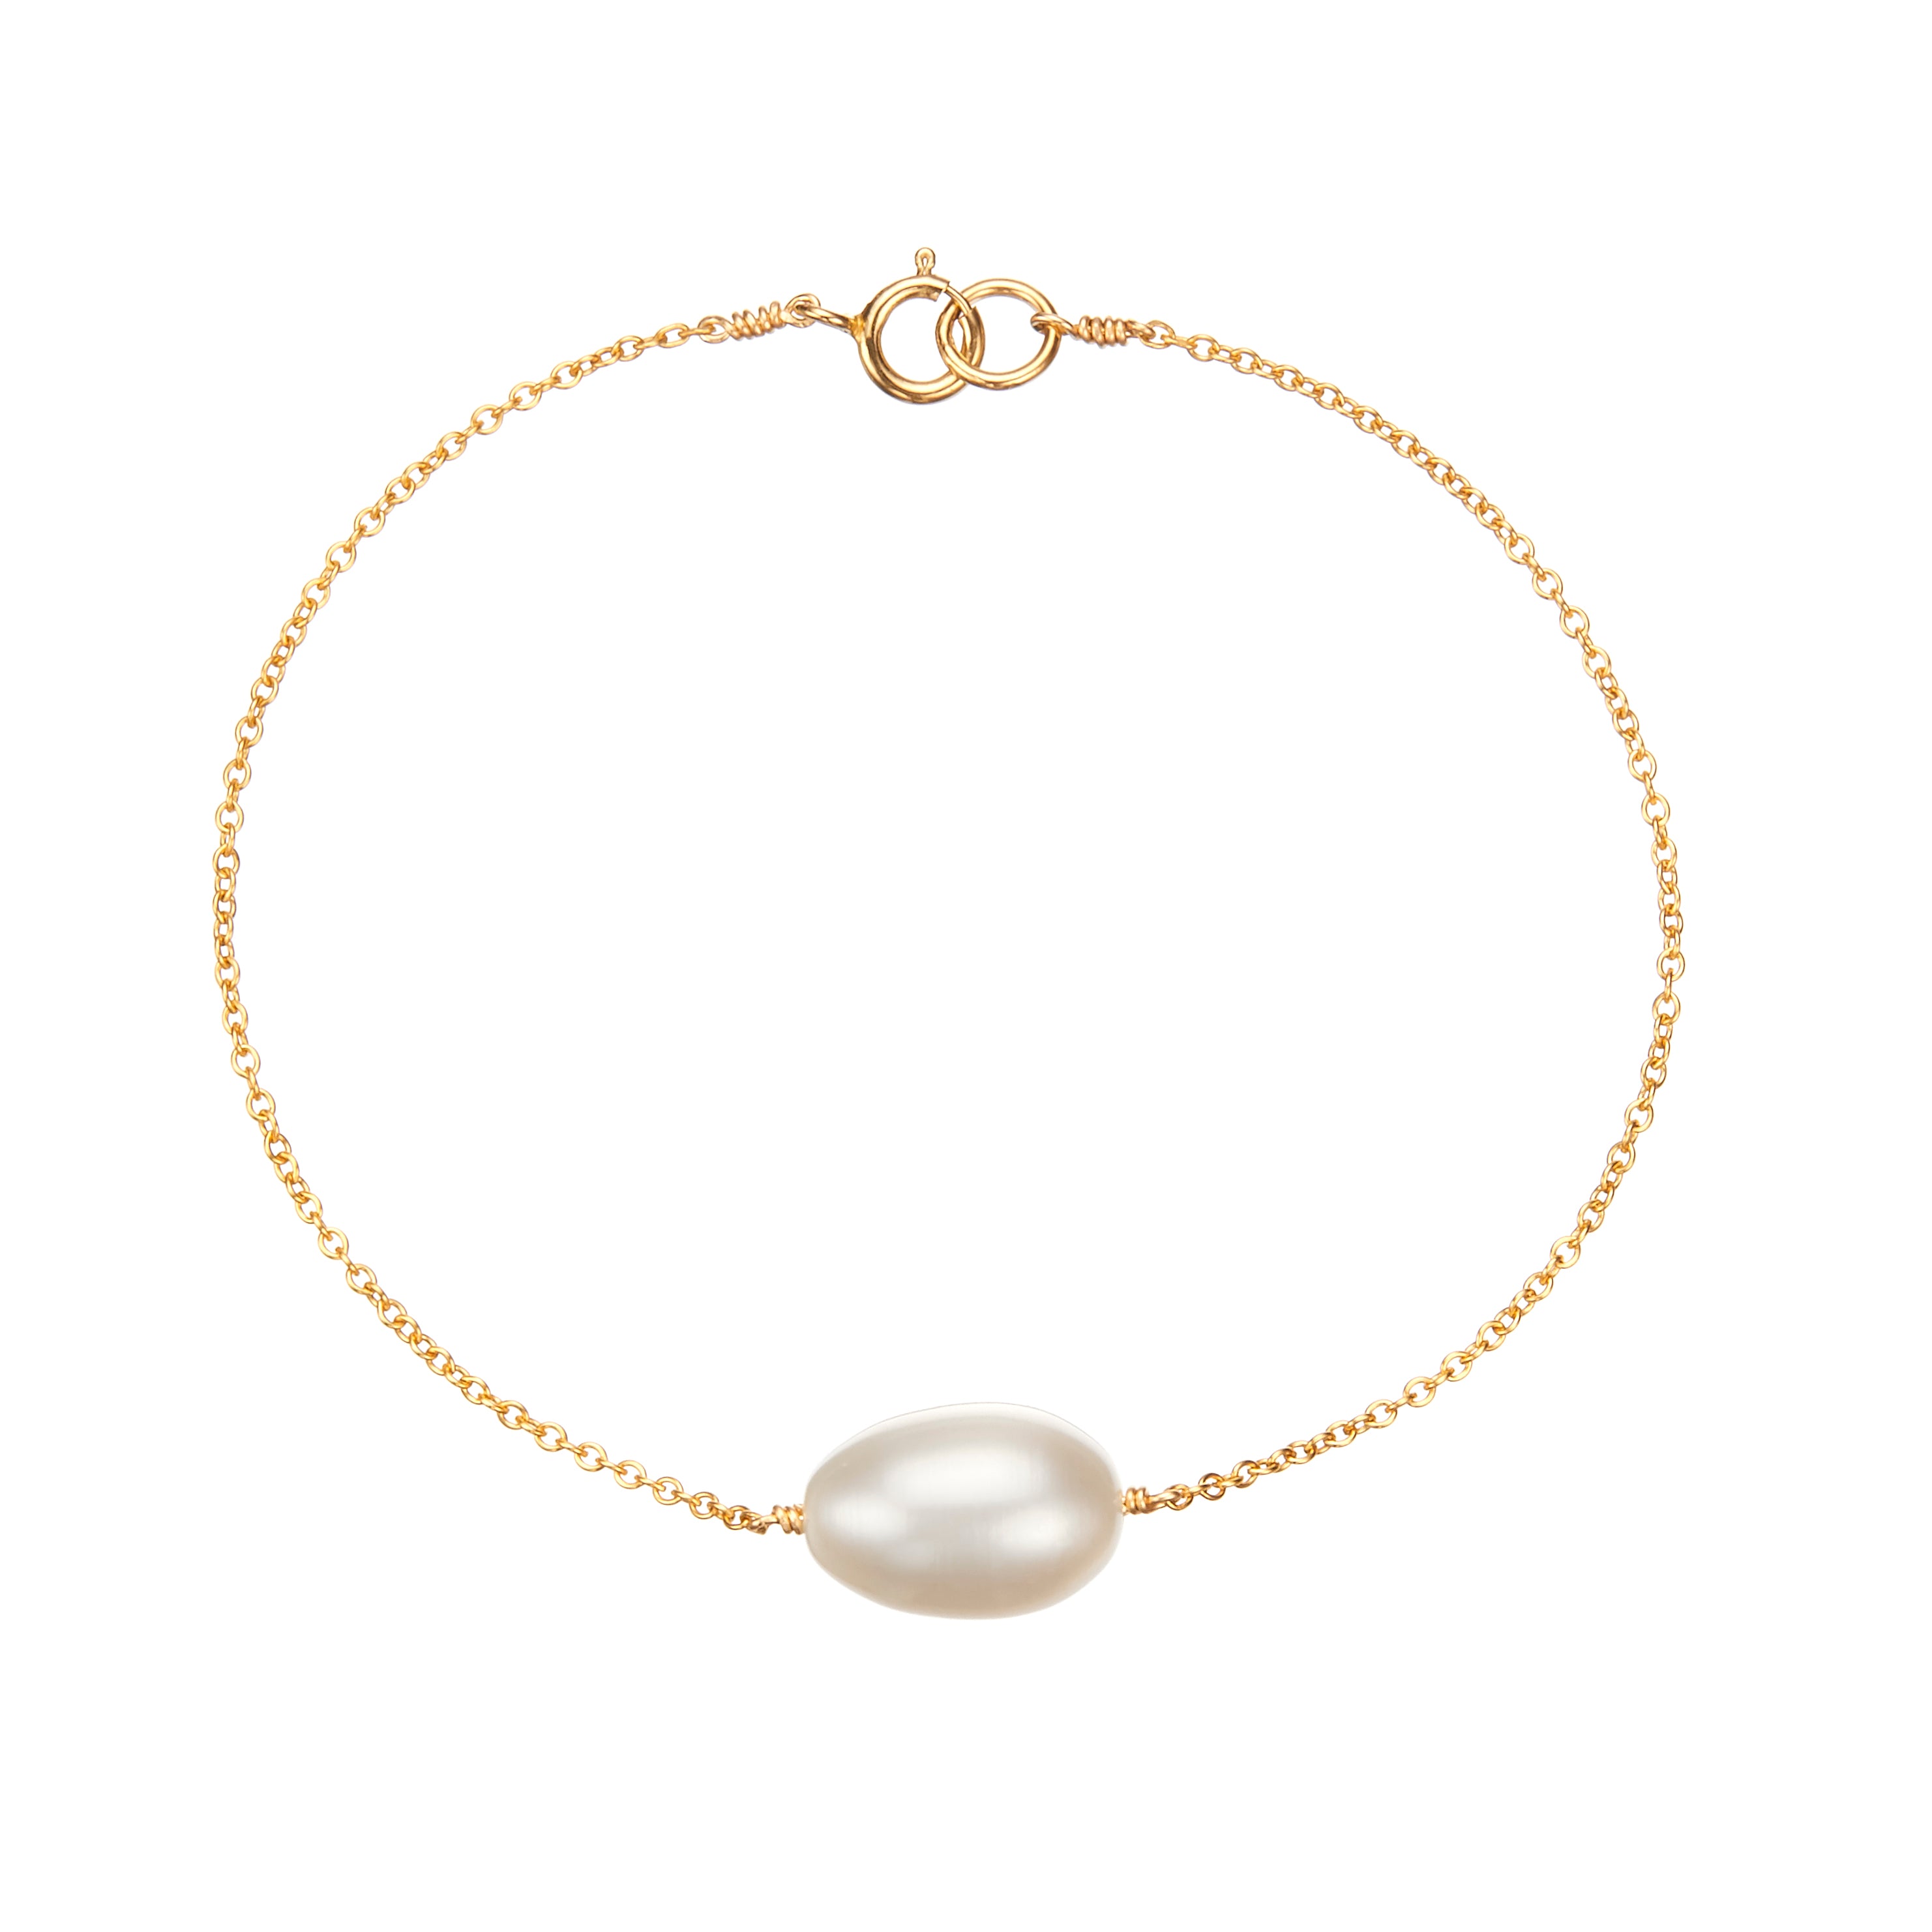 Gold large pearl bracelet on a white background